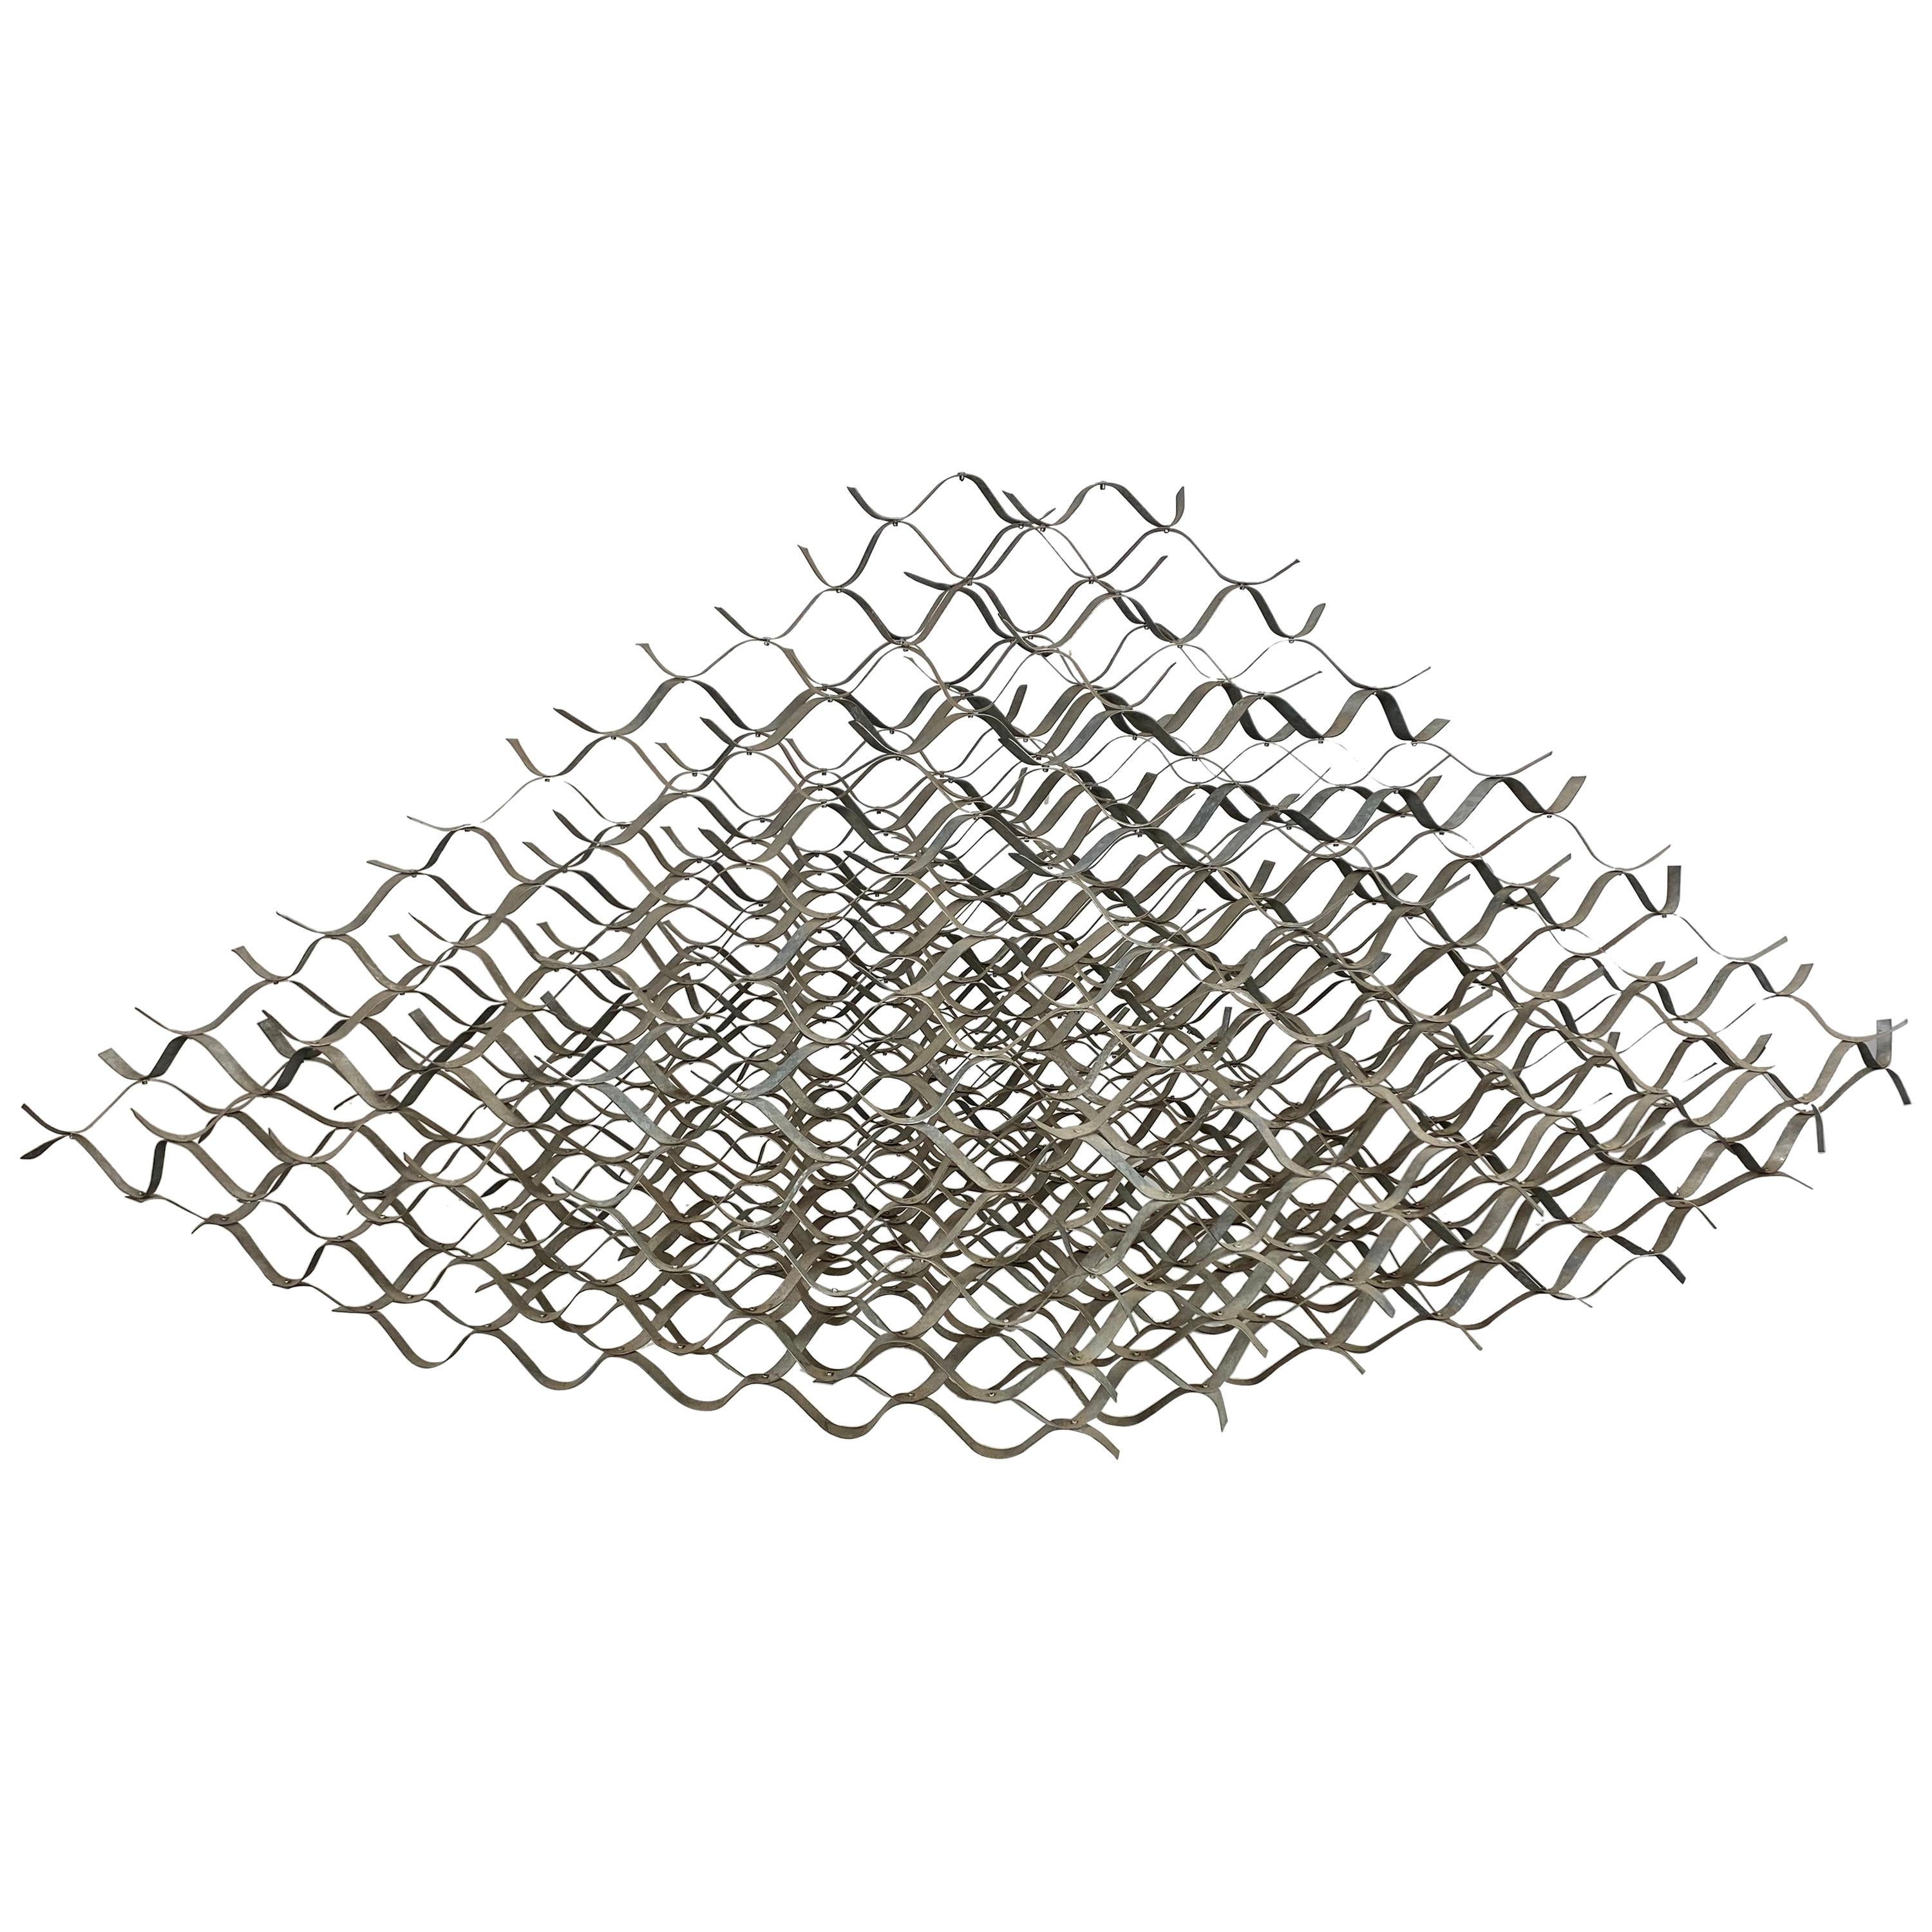 Large Modernist Abstract Sculpture "INNERWOVEN STRUCTURE" by Duayne Hatchett For Sale